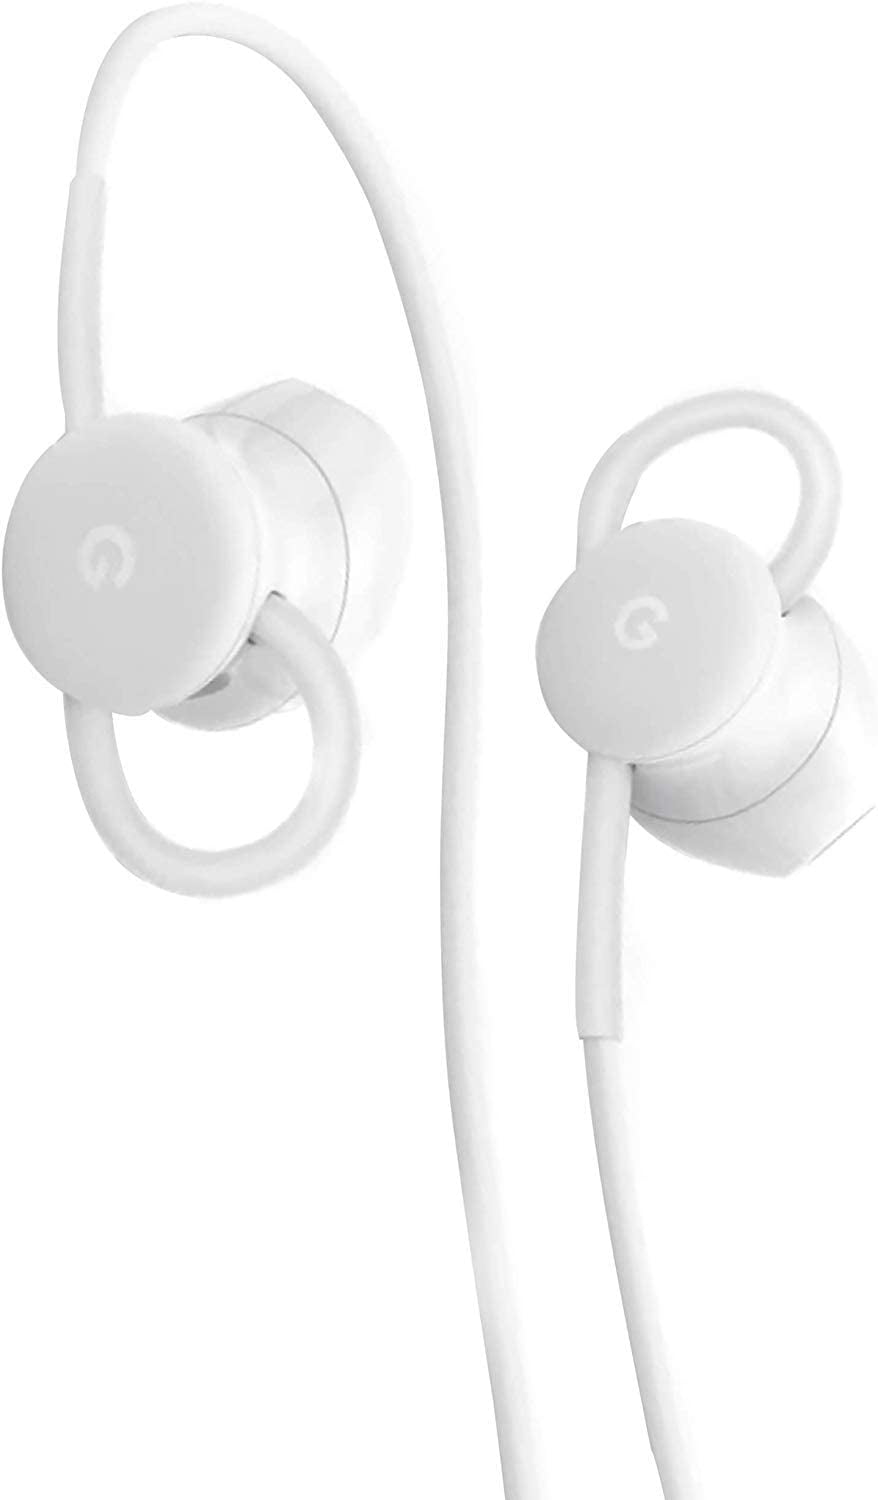 oscuridad Activo Casi muerto Google Earbuds USB-C Wired Digital Headset Type-C for Pixel Phones -  Microphone and Volume Control - White - Walmart.com